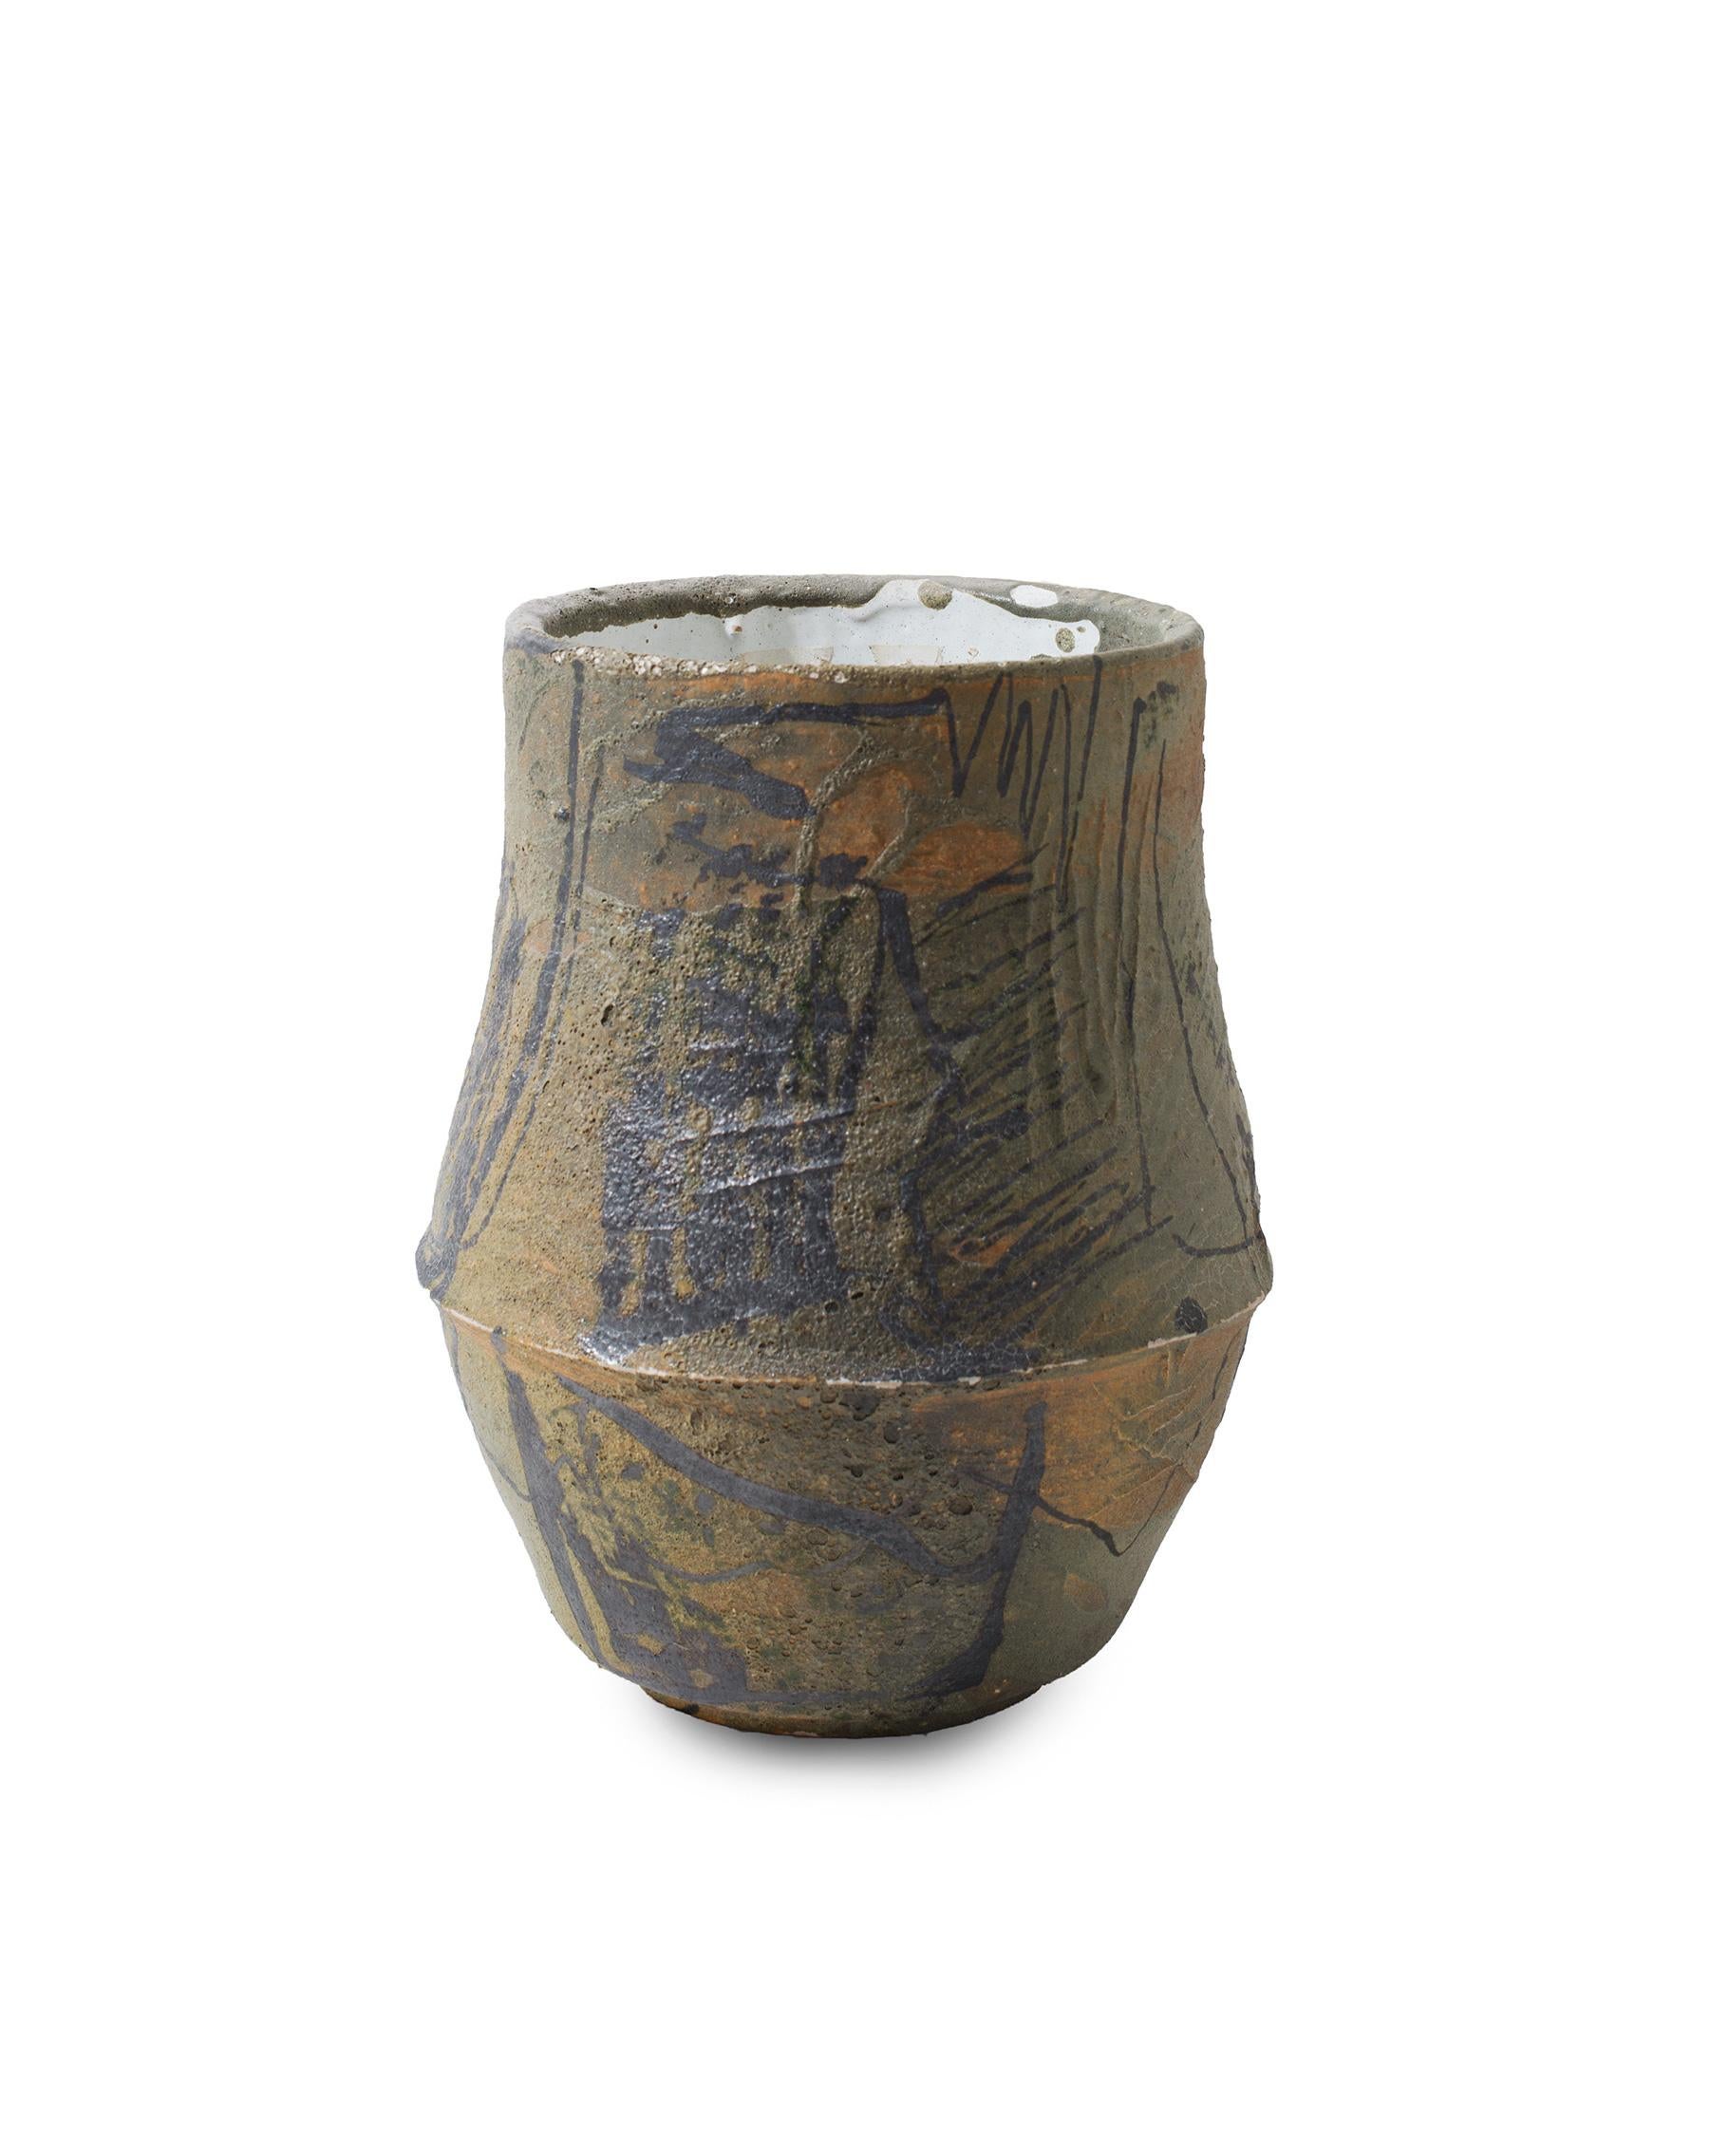 A ceramic vase designed and produced by Marcello Fantoni in 1983. Signed.

Biography:
Marcello Fantoni was born in Florence on October 1, 1915. Growing up, he became passionate about art, and therefore enrolled in the Art Institute of Porta Romana,